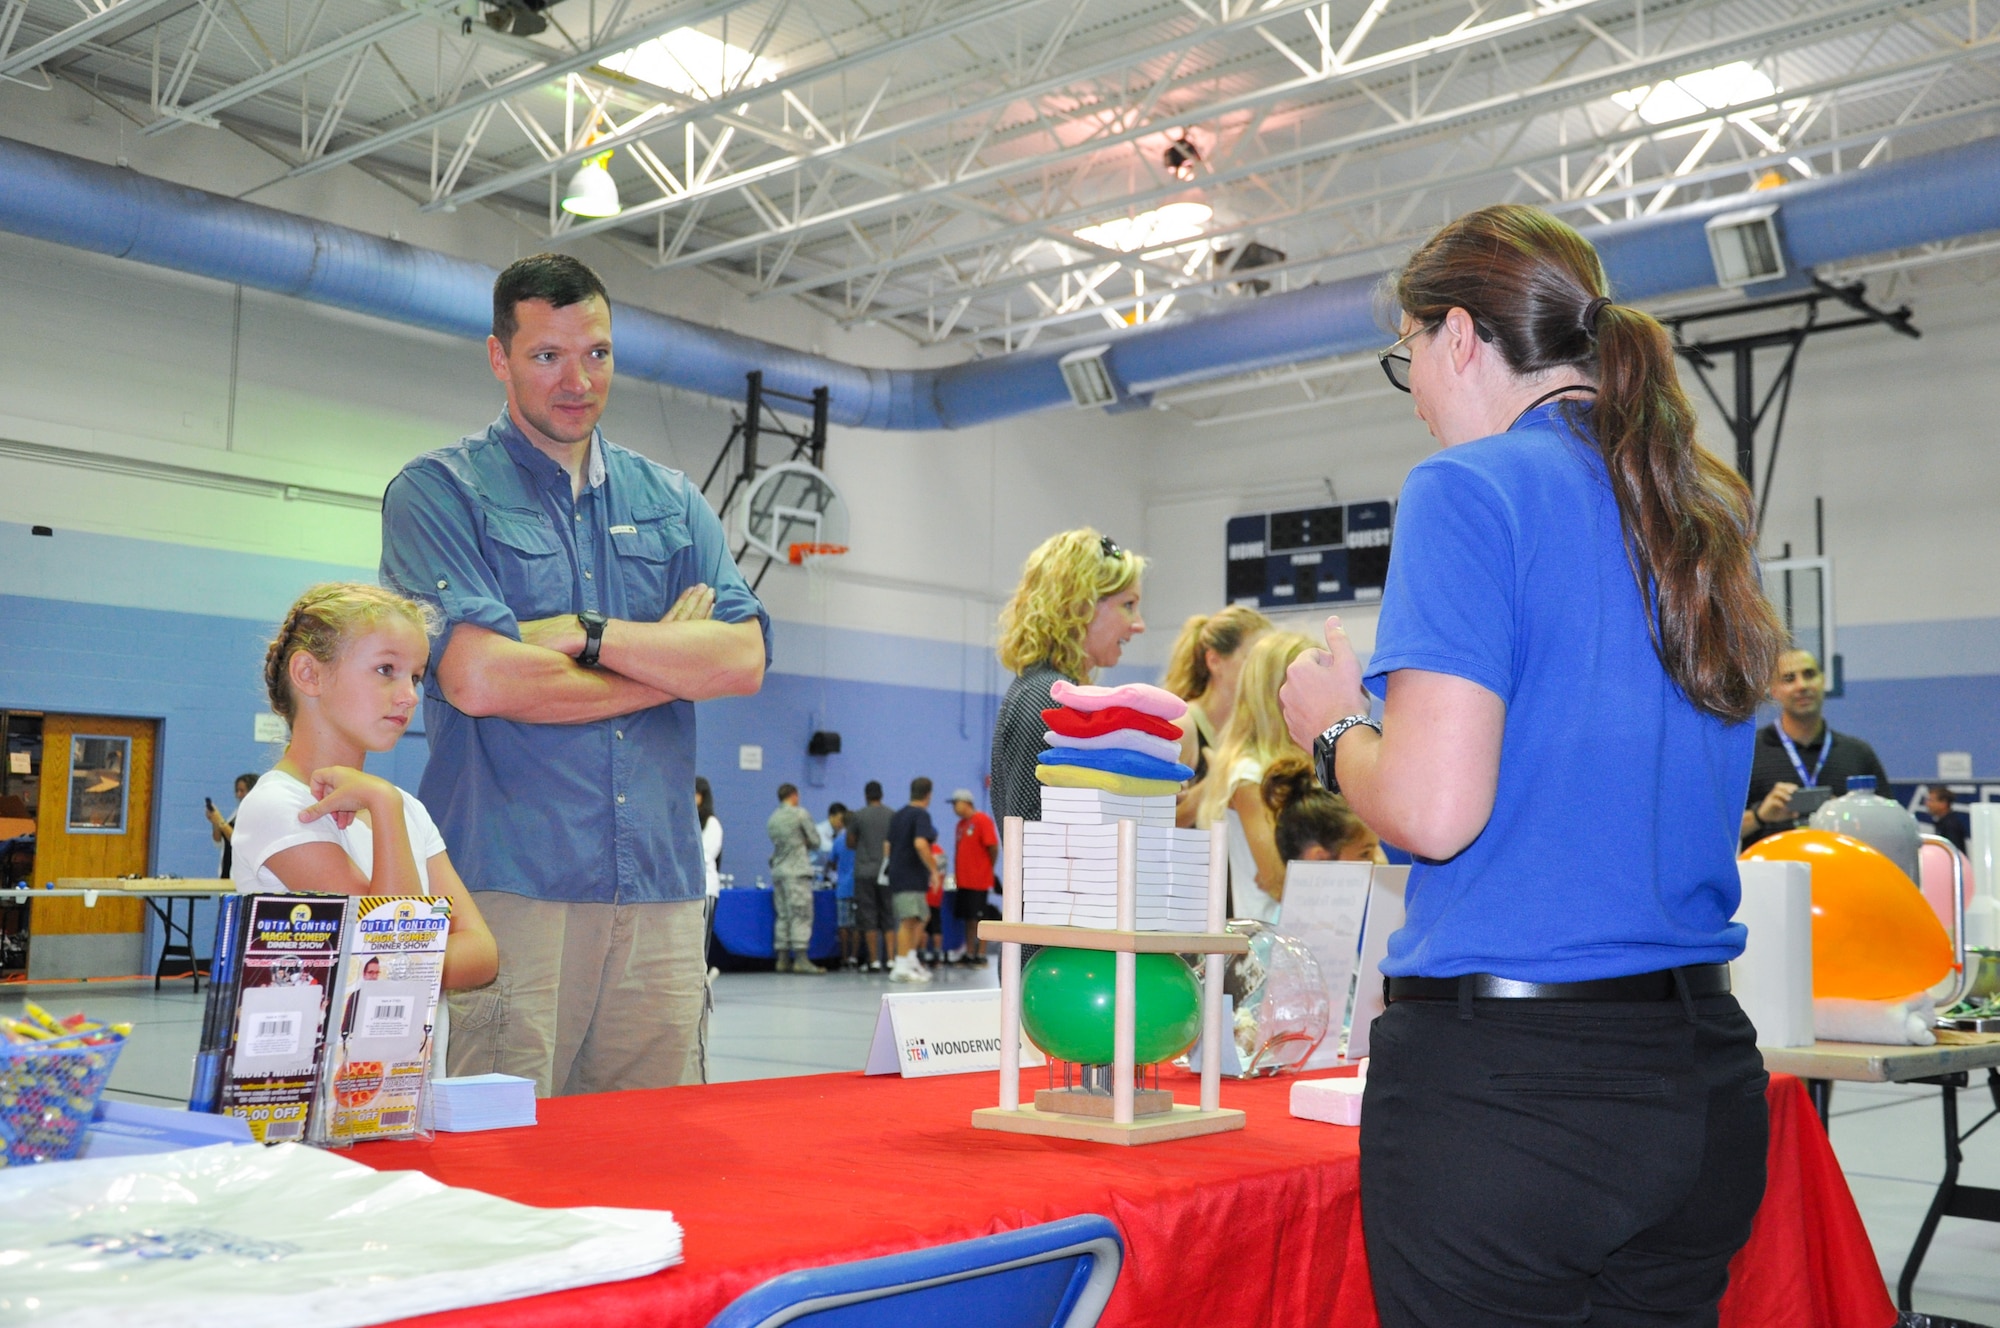 Maj. John A. Carter, 45th Logistics Readiness Squadron commander, and his daughter Emma, 8, watch a Wonderworks demonstration during the 45th Space Wing’s All SySTEMs Go event June 11, 2016, at the Youth Center/Shark Center at Patrick Air Force Base, Fla. The event was designed to teach children of all ages about science, technology, engineering and math. (U.S. Air Force Photo/Tech. Sgt. Erin Smith/Released)